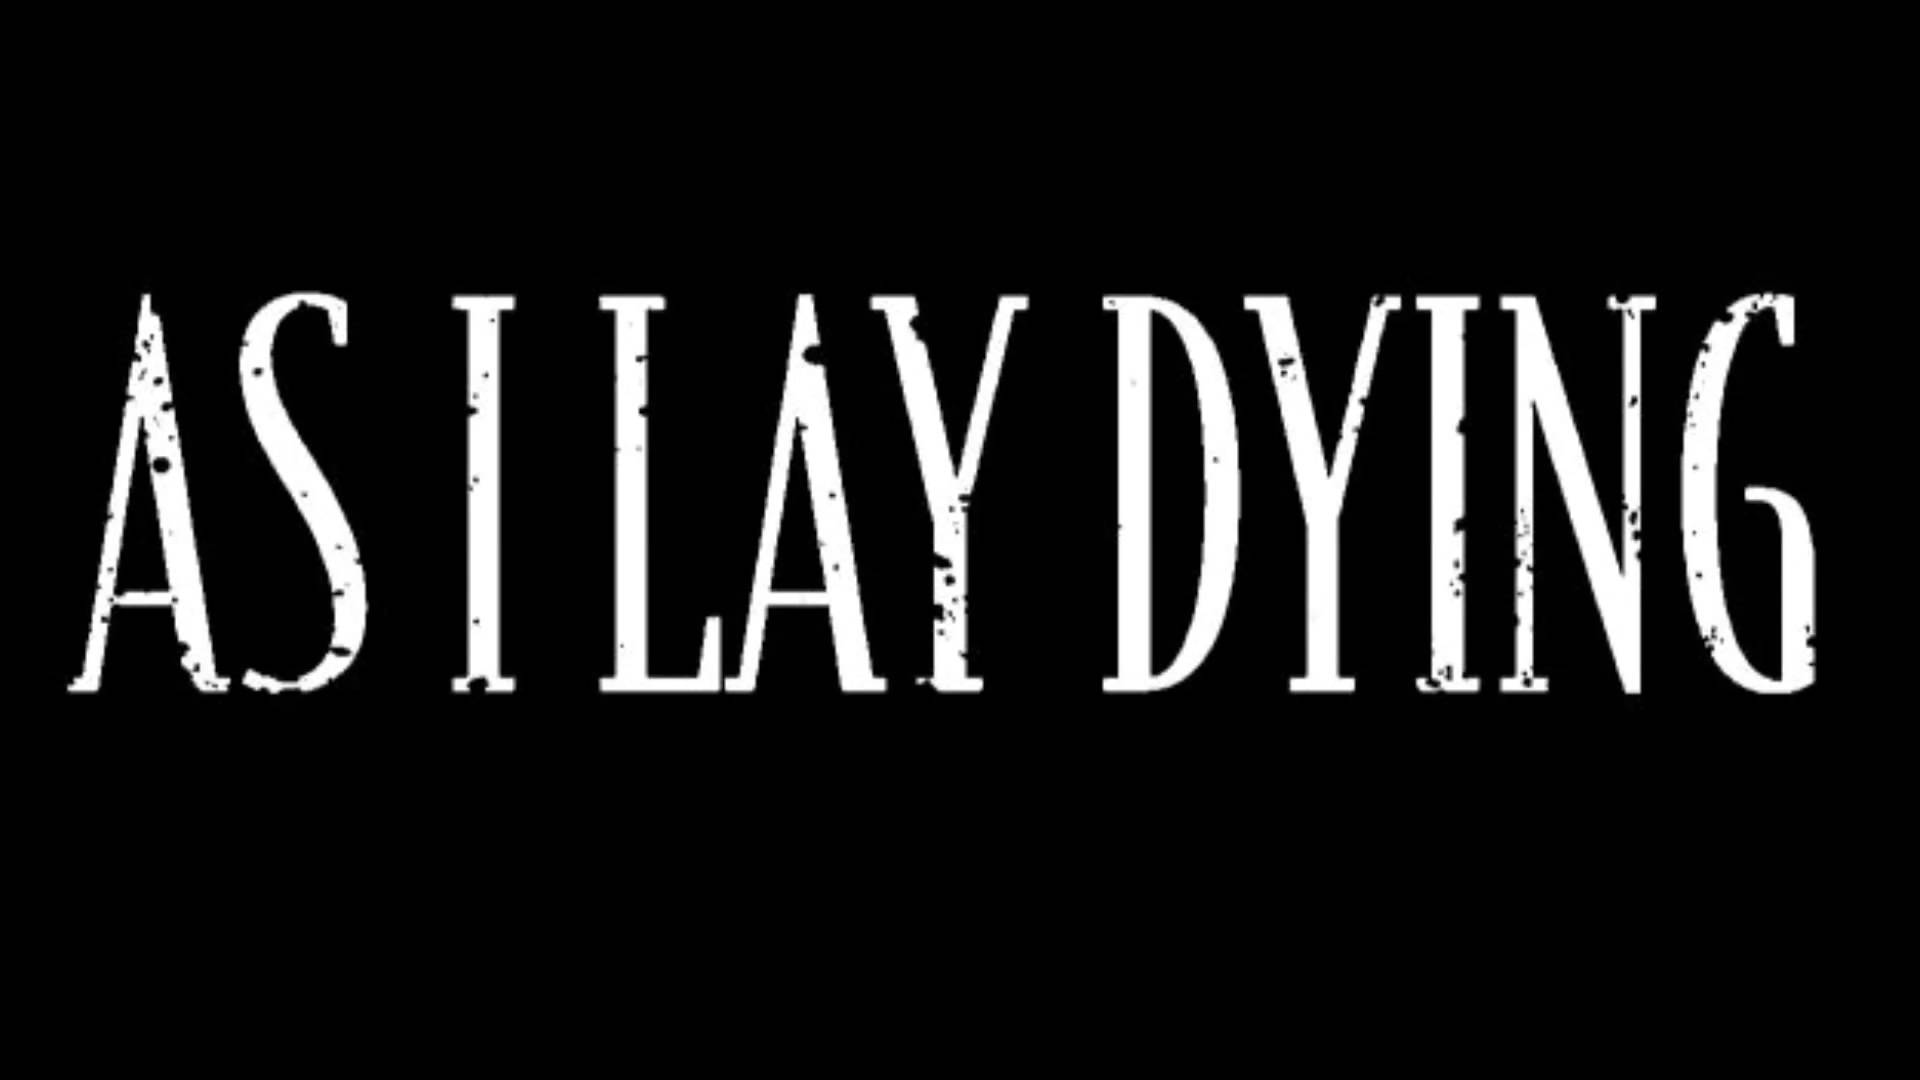 Nice Images Collection: As I Lay Dying Desktop Wallpapers